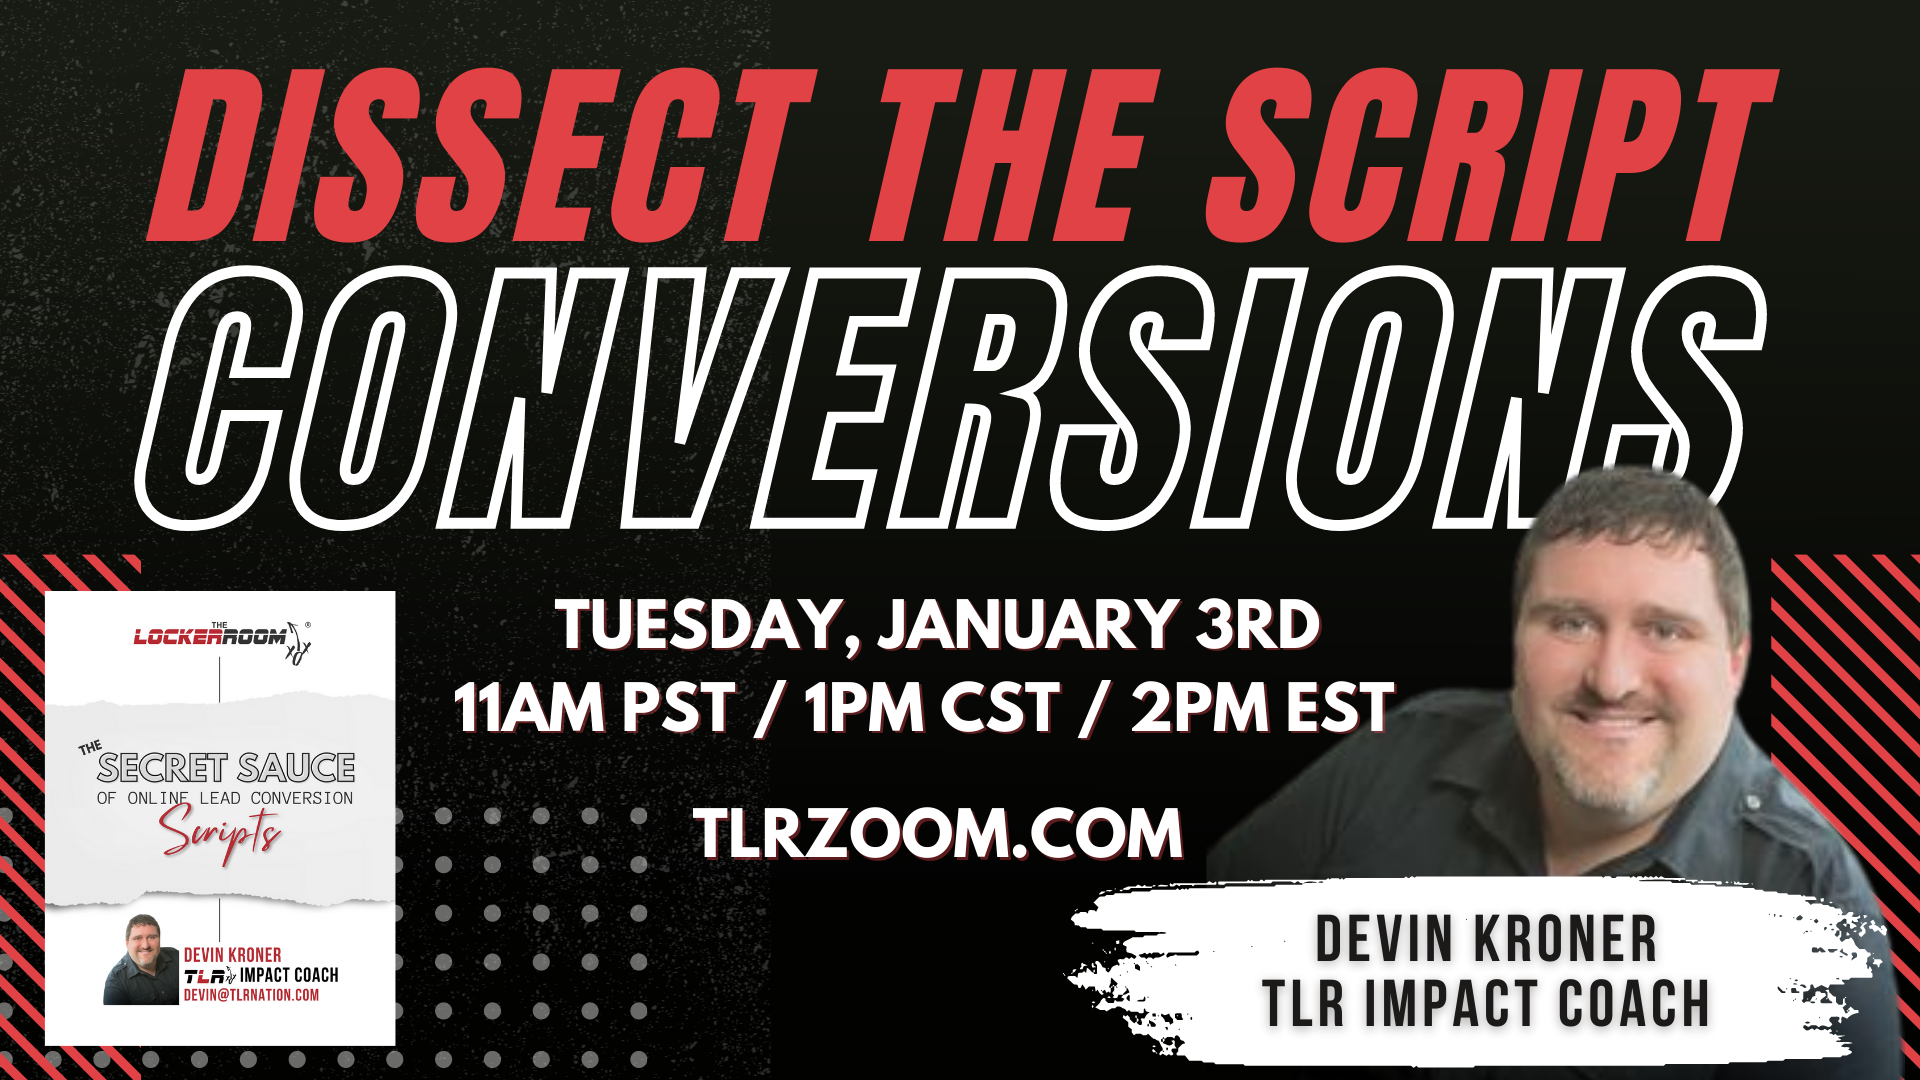 
TLR: Dissect the Script: Convert More